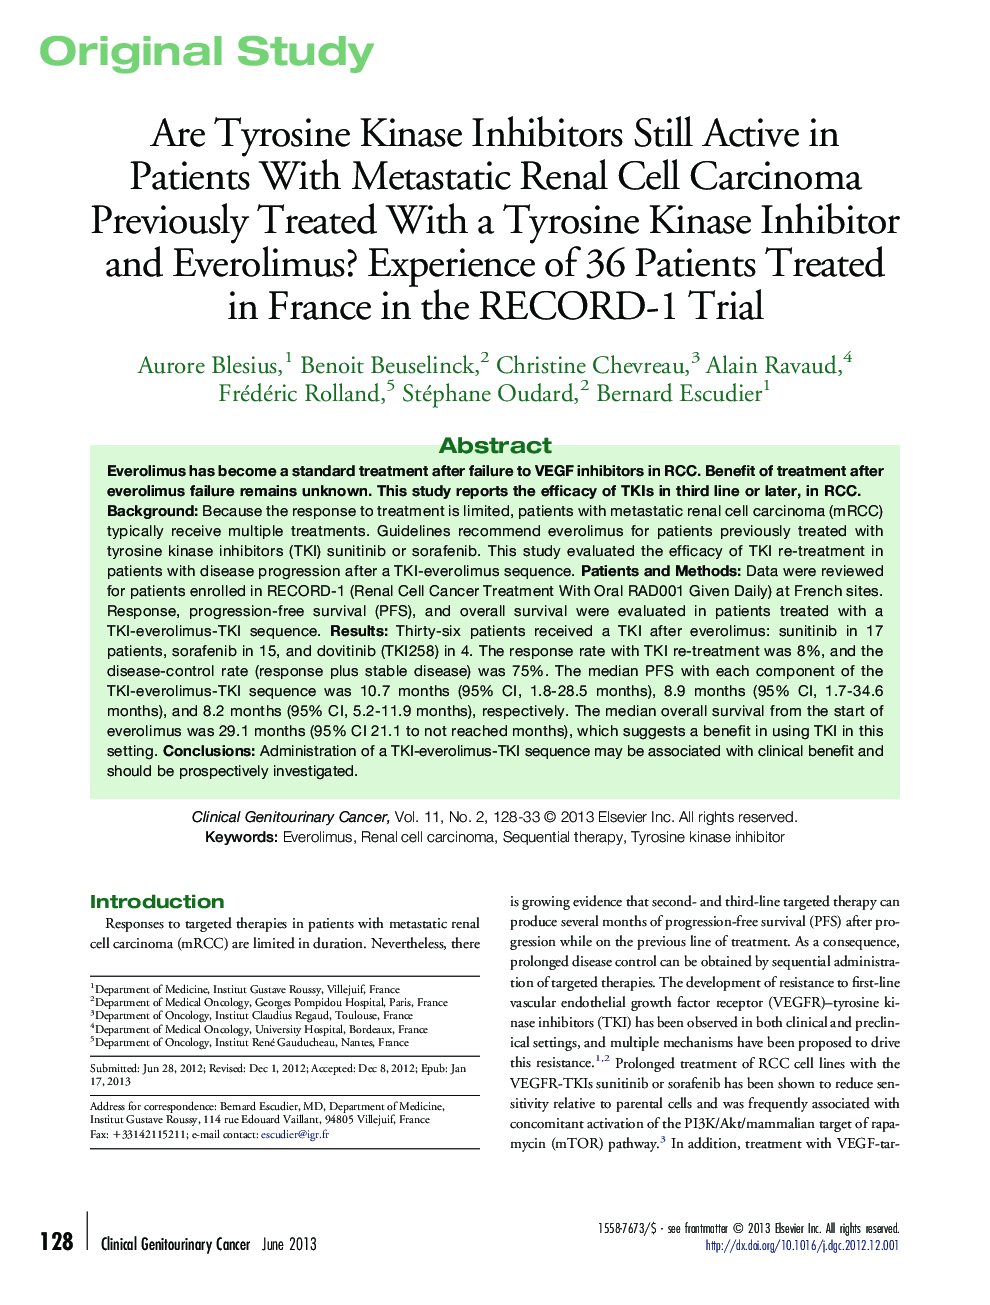 Are Tyrosine Kinase Inhibitors Still Active in Patients With Metastatic Renal Cell Carcinoma Previously Treated With a Tyrosine Kinase Inhibitor and Everolimus? Experience of 36 Patients Treated in France in the RECORD-1 Trial